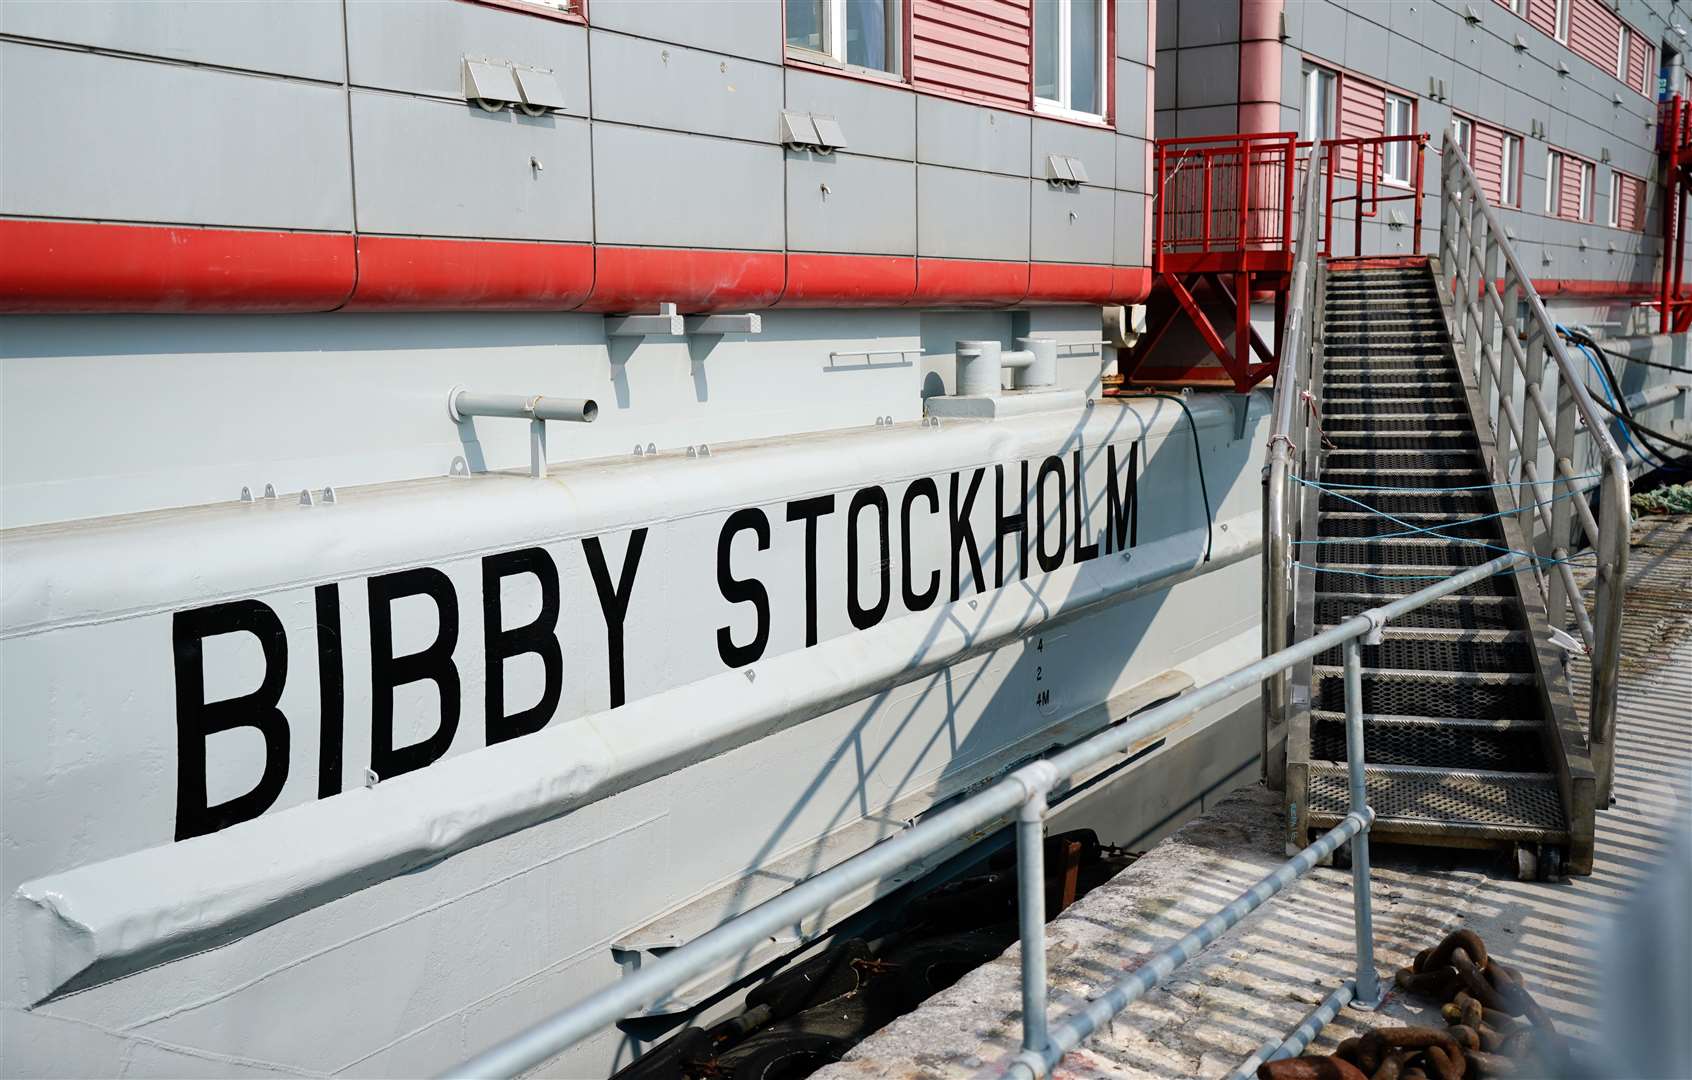 The Bibby Stockholm is intended to house around 500 migrants but the plan has been beset with problems and delays (Andrew Matthews/PA)